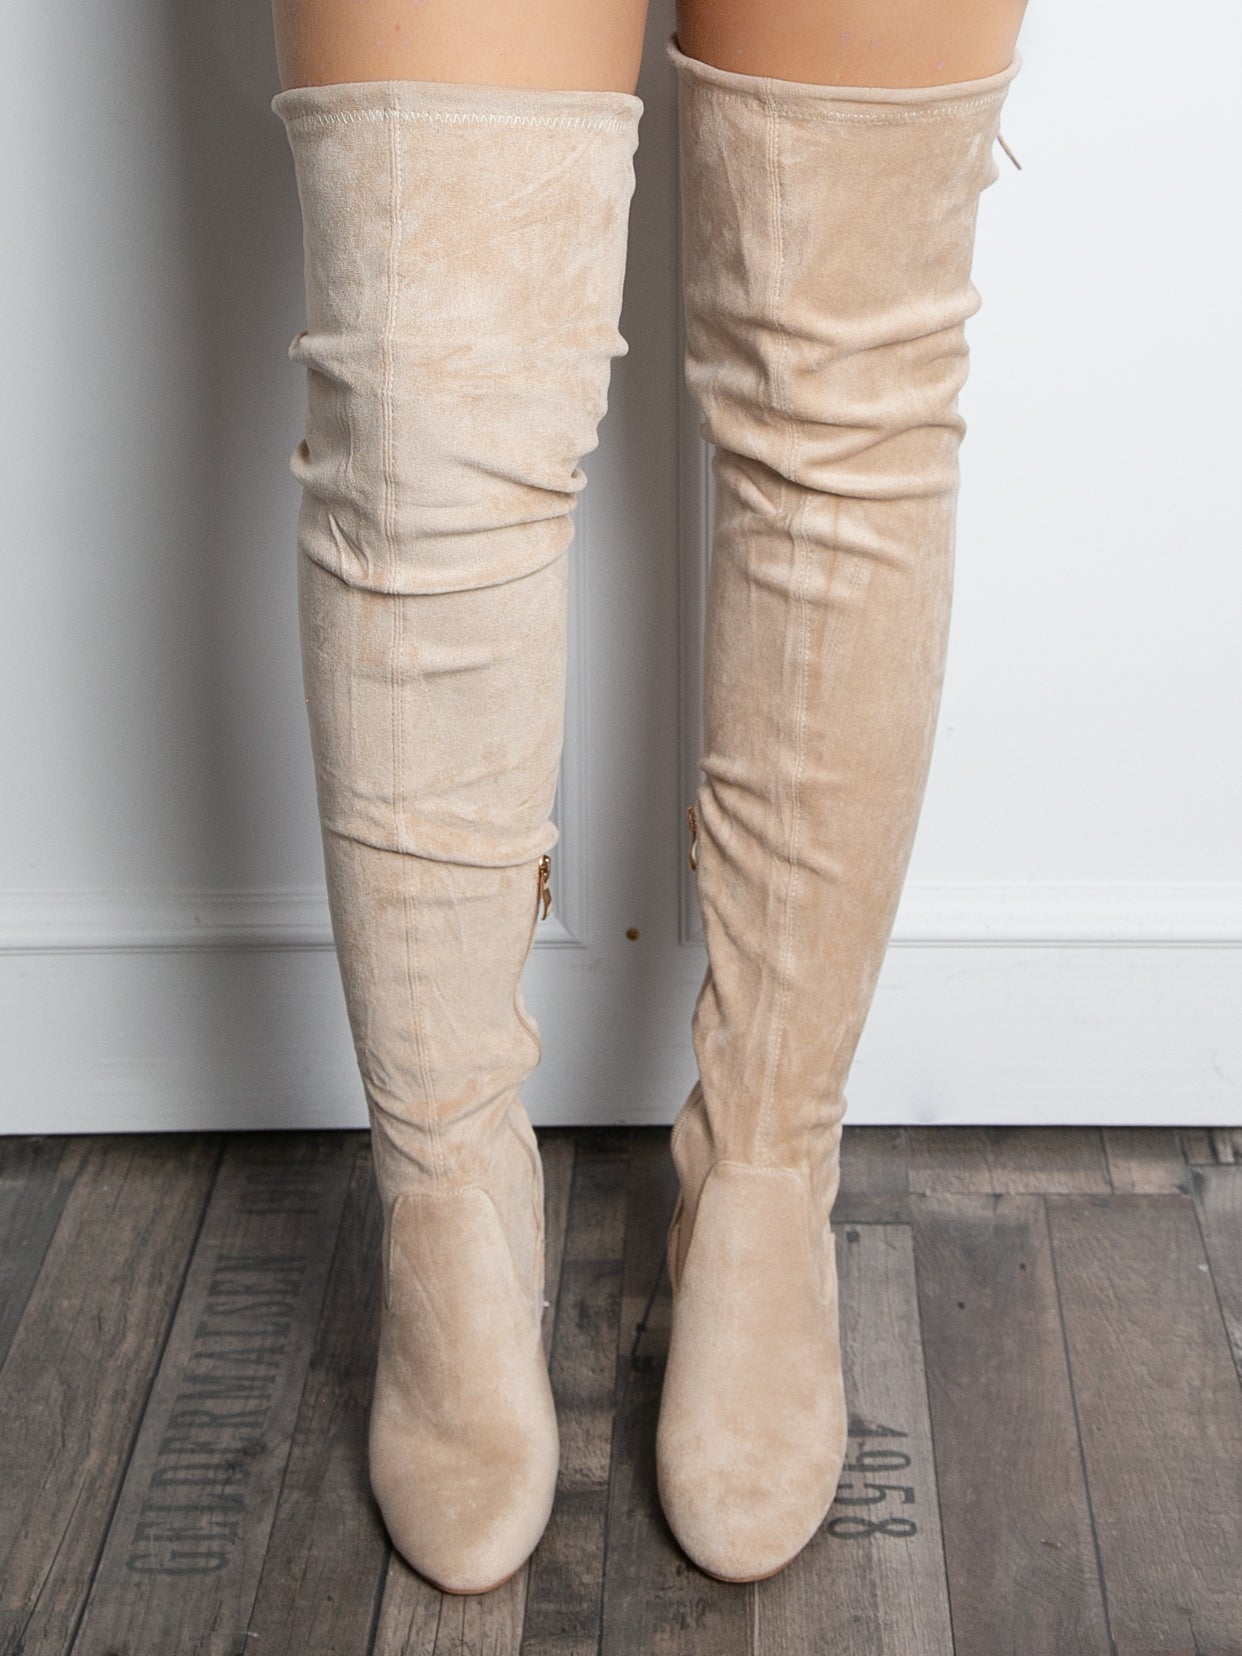 Over the knee boots imitation suede beige